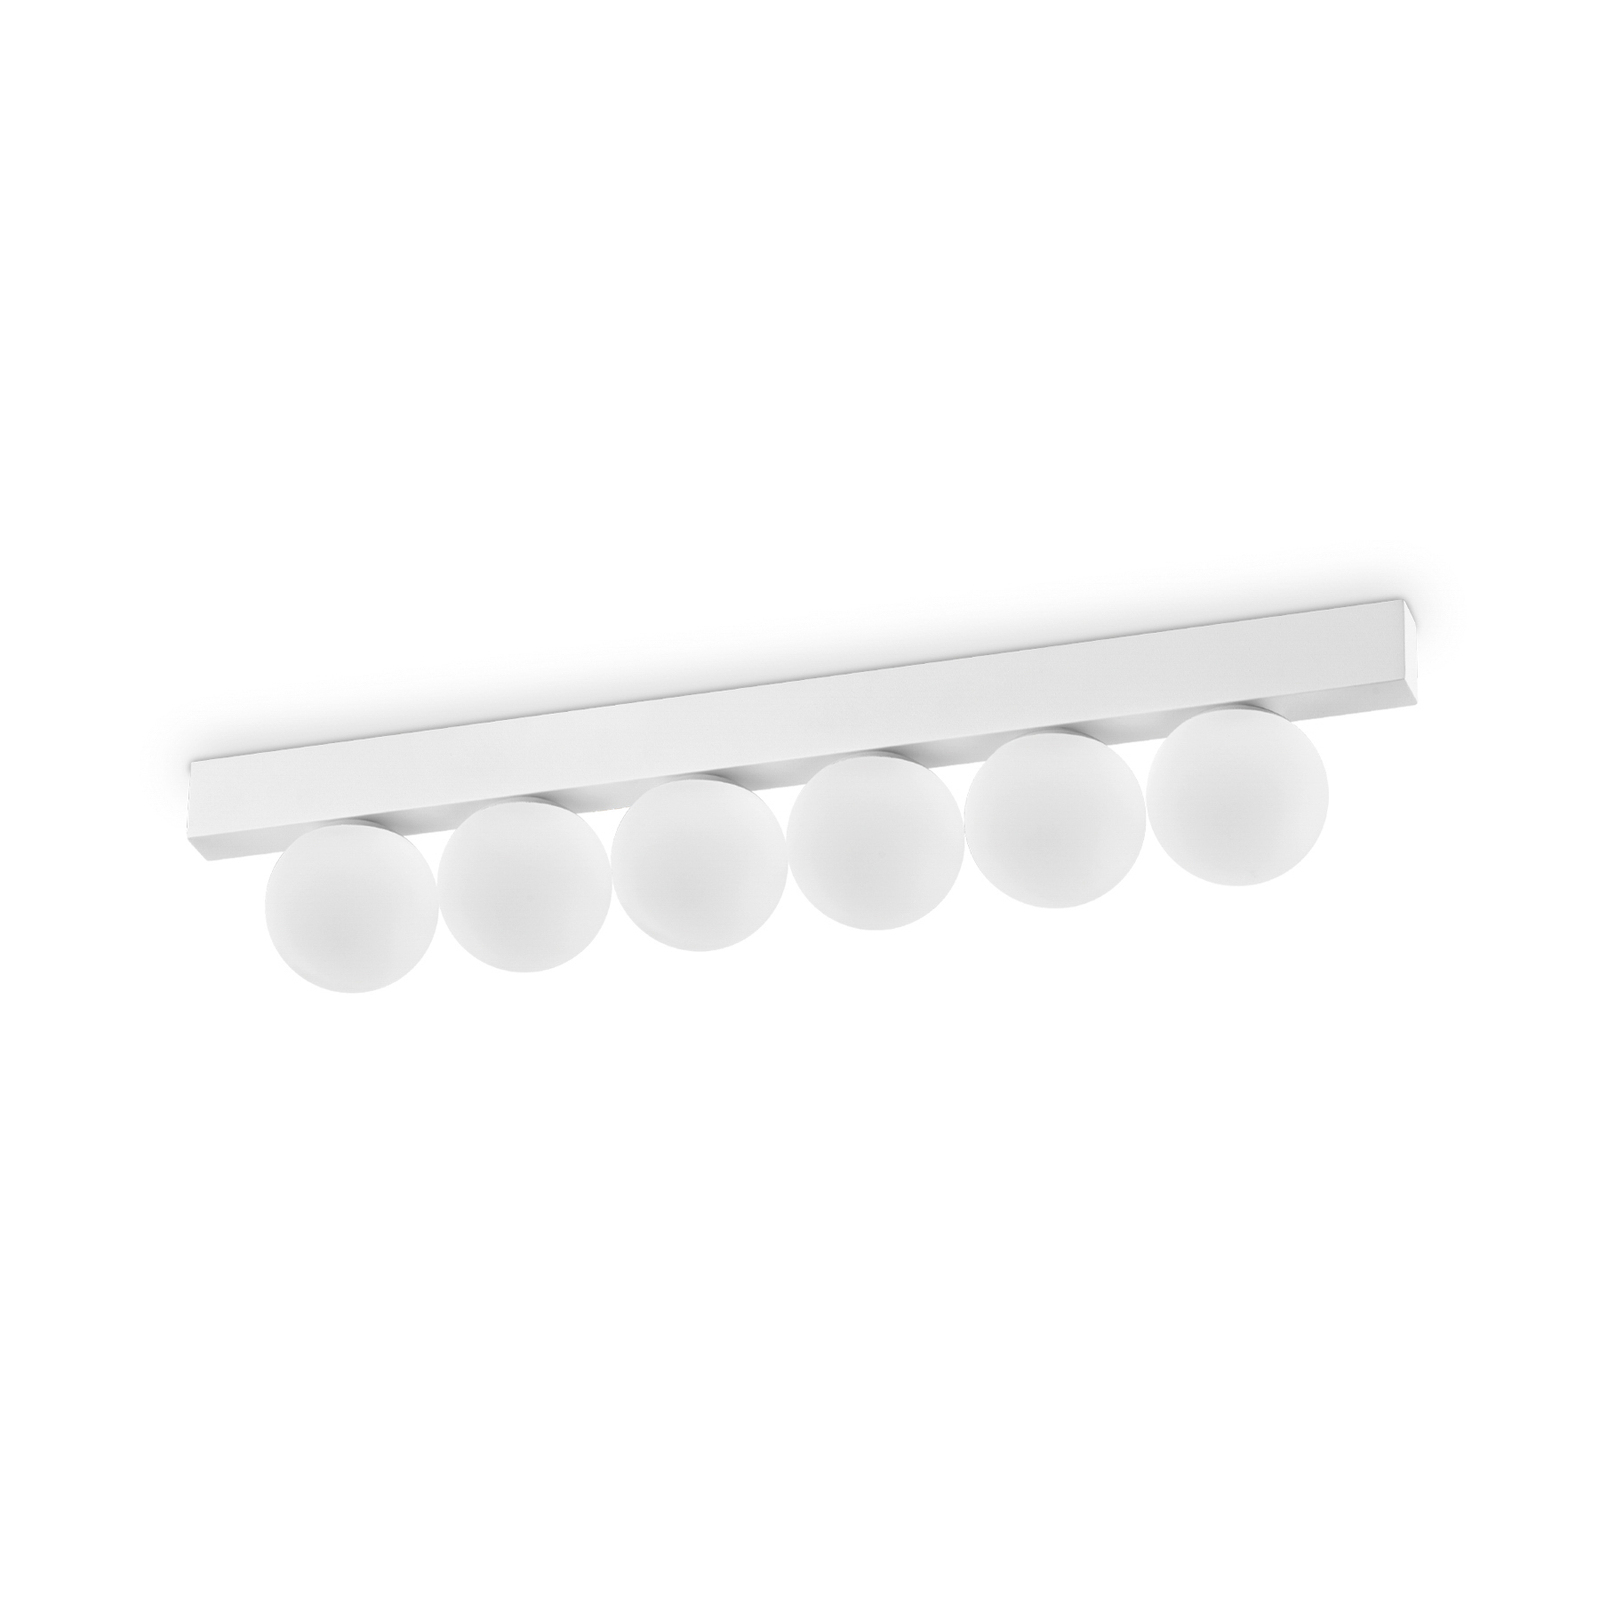 Ideal Lux plafondlamp Ping Pong wit 6-lamps, opaal glas